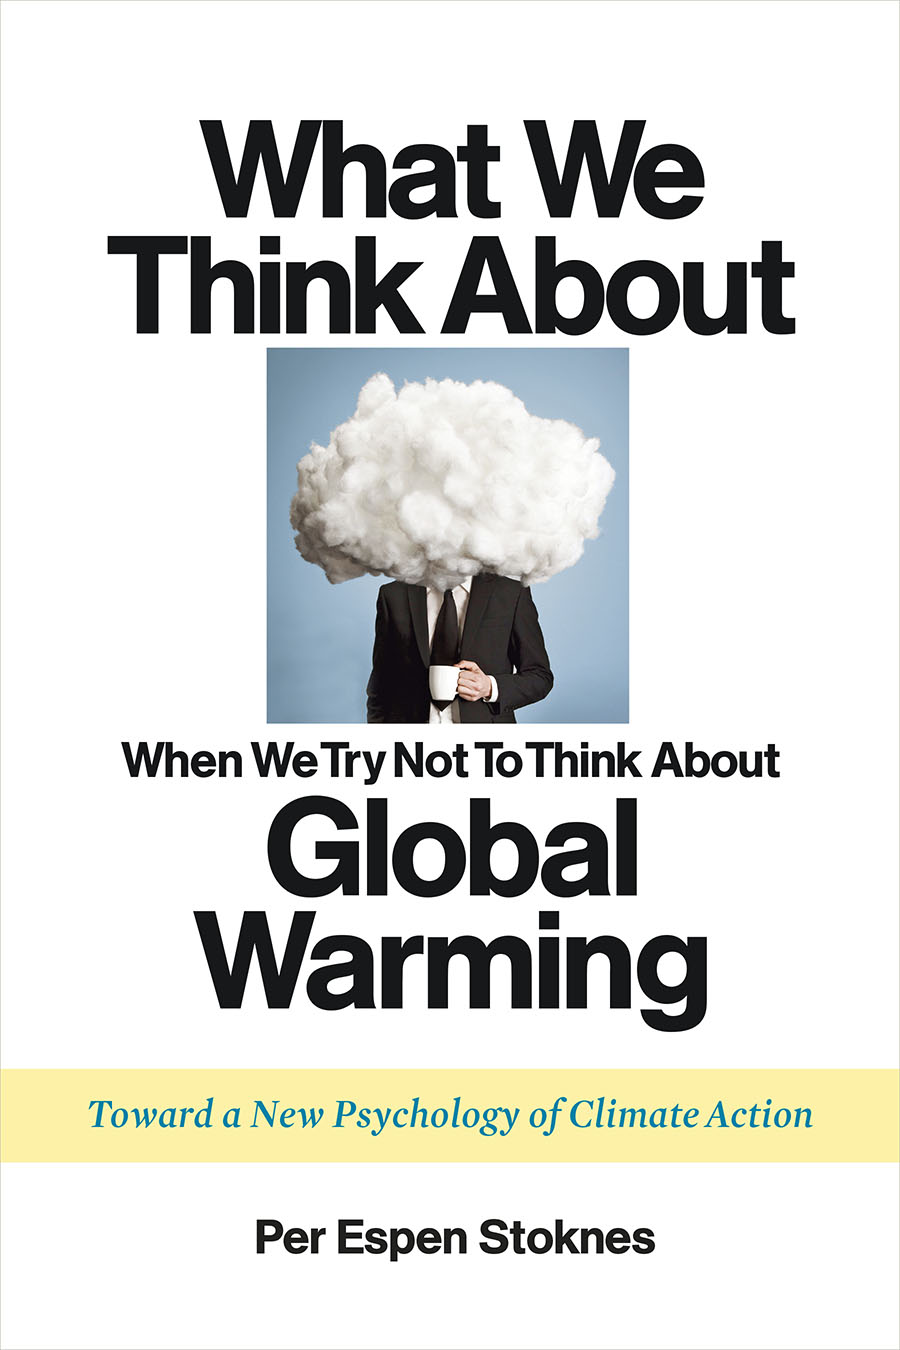  What We Think about When We Try Not to Think about Global Warming